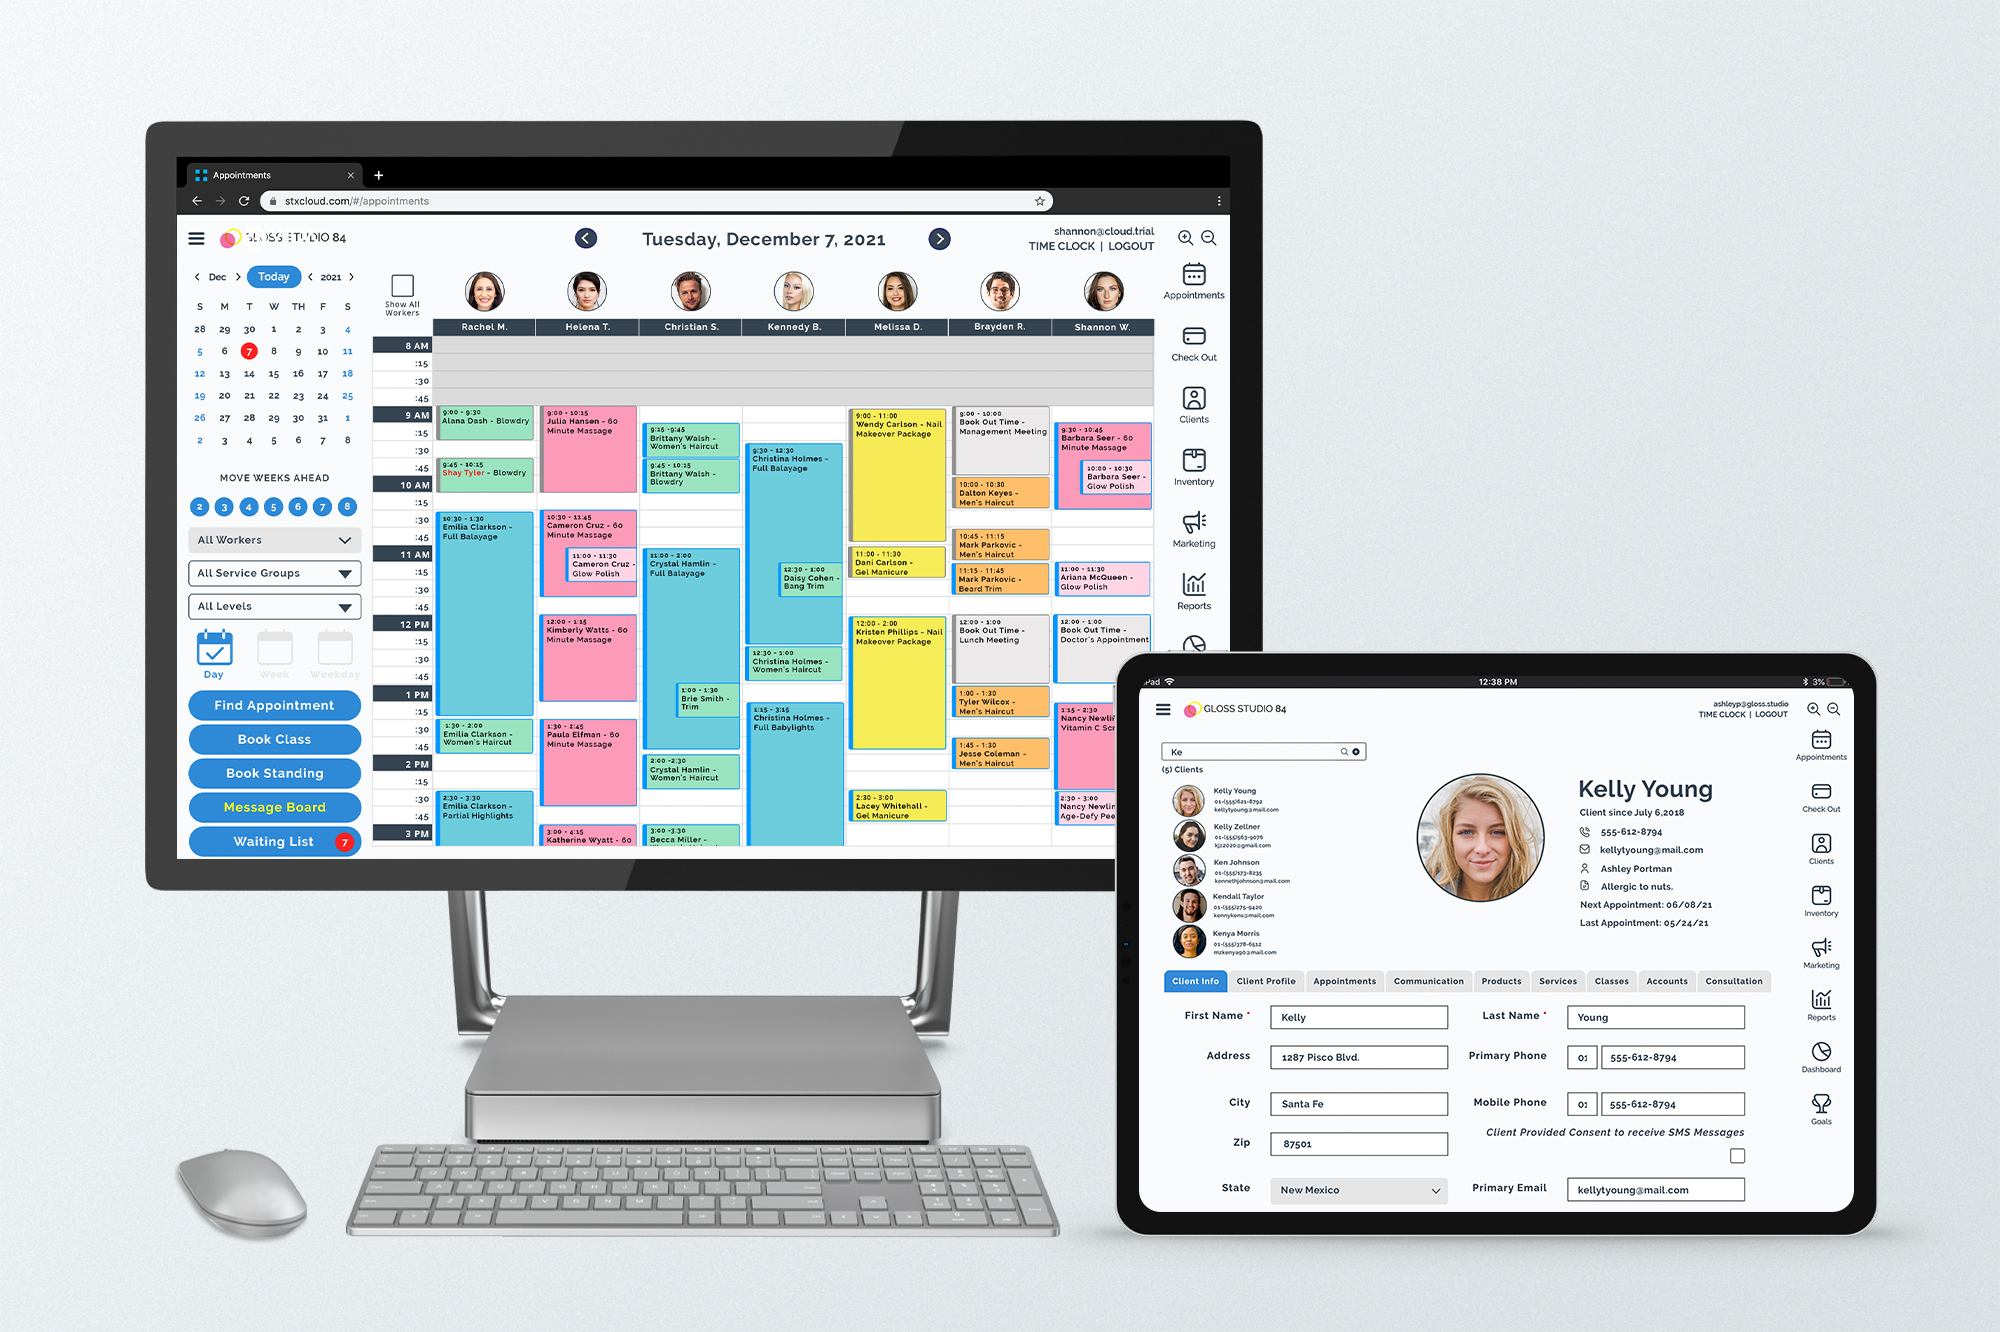 Keep your book and clients organized in one place. With a color-coded calendar, one-click appointments, drag-and-drop rescheduling, and more, your book has never looked better. Store notes, history, contact info, and more with Inspire's client cards.